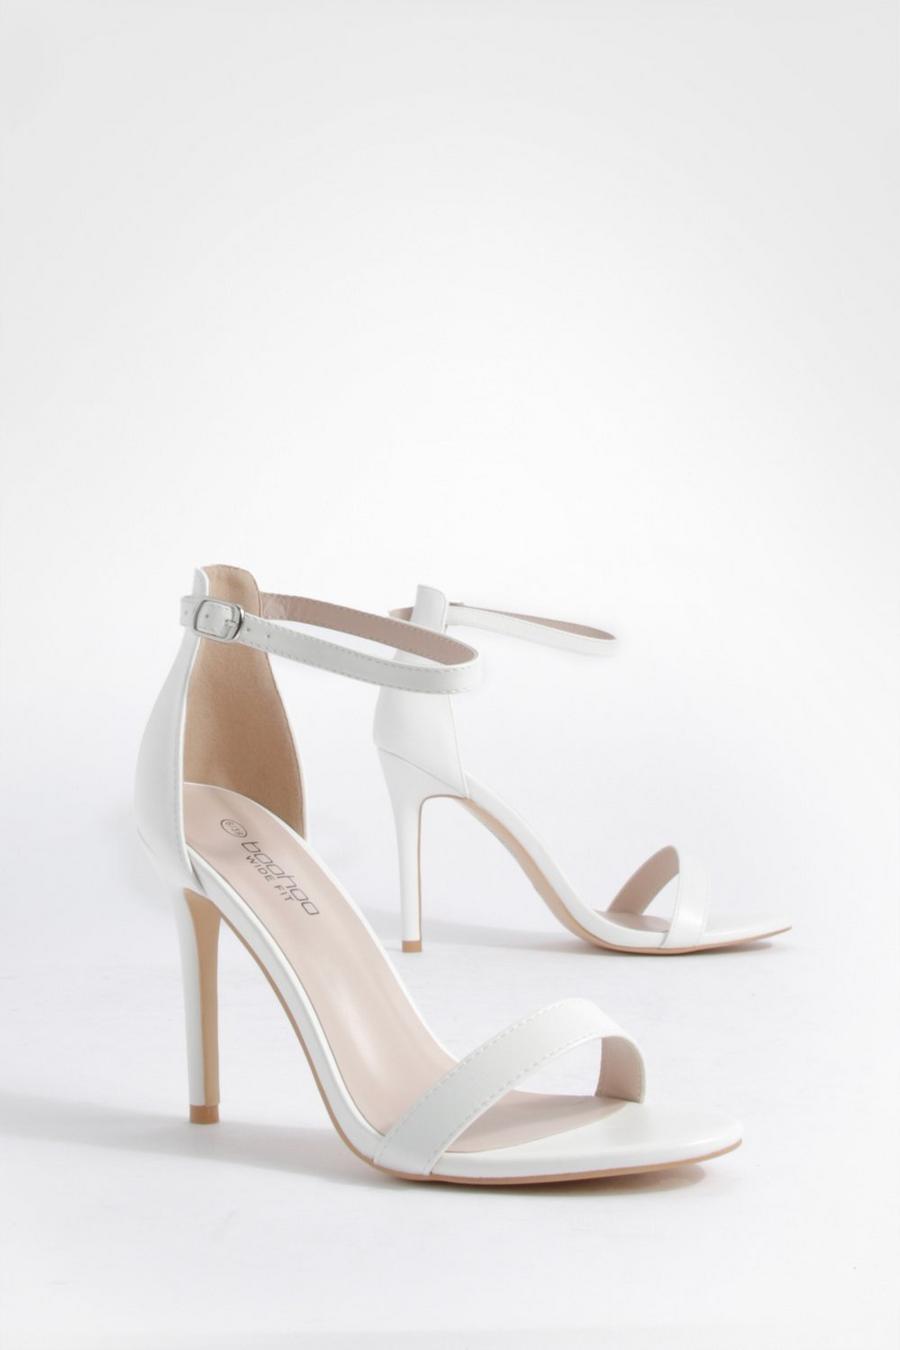 White Wide Width Barely There Basic Heels